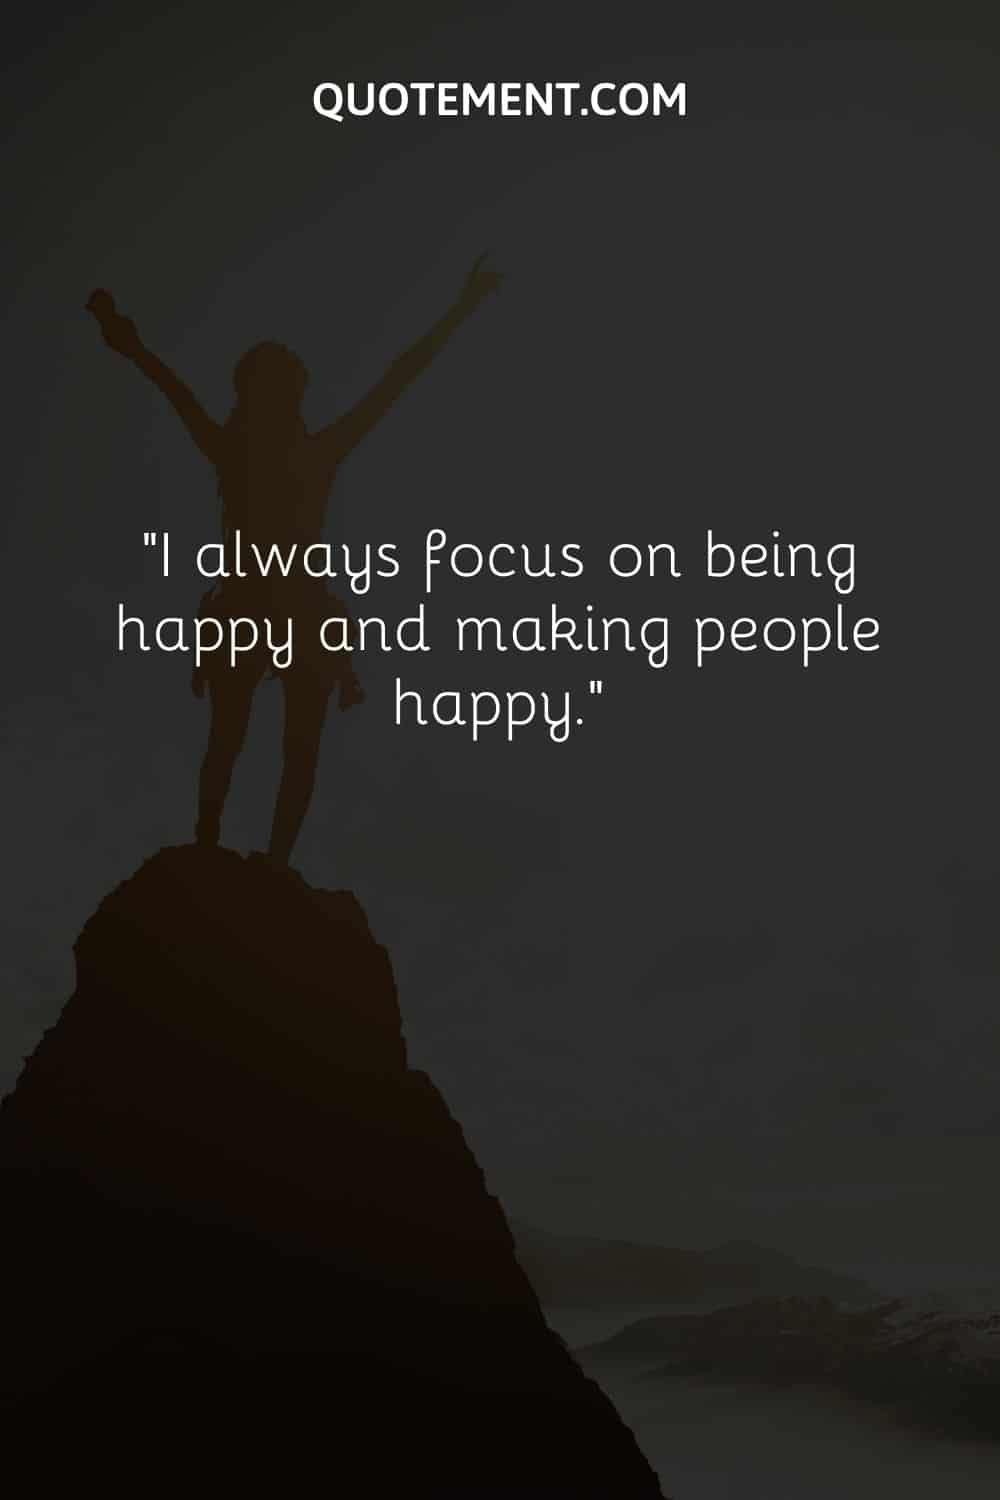 I always focus on being happy and making people happy